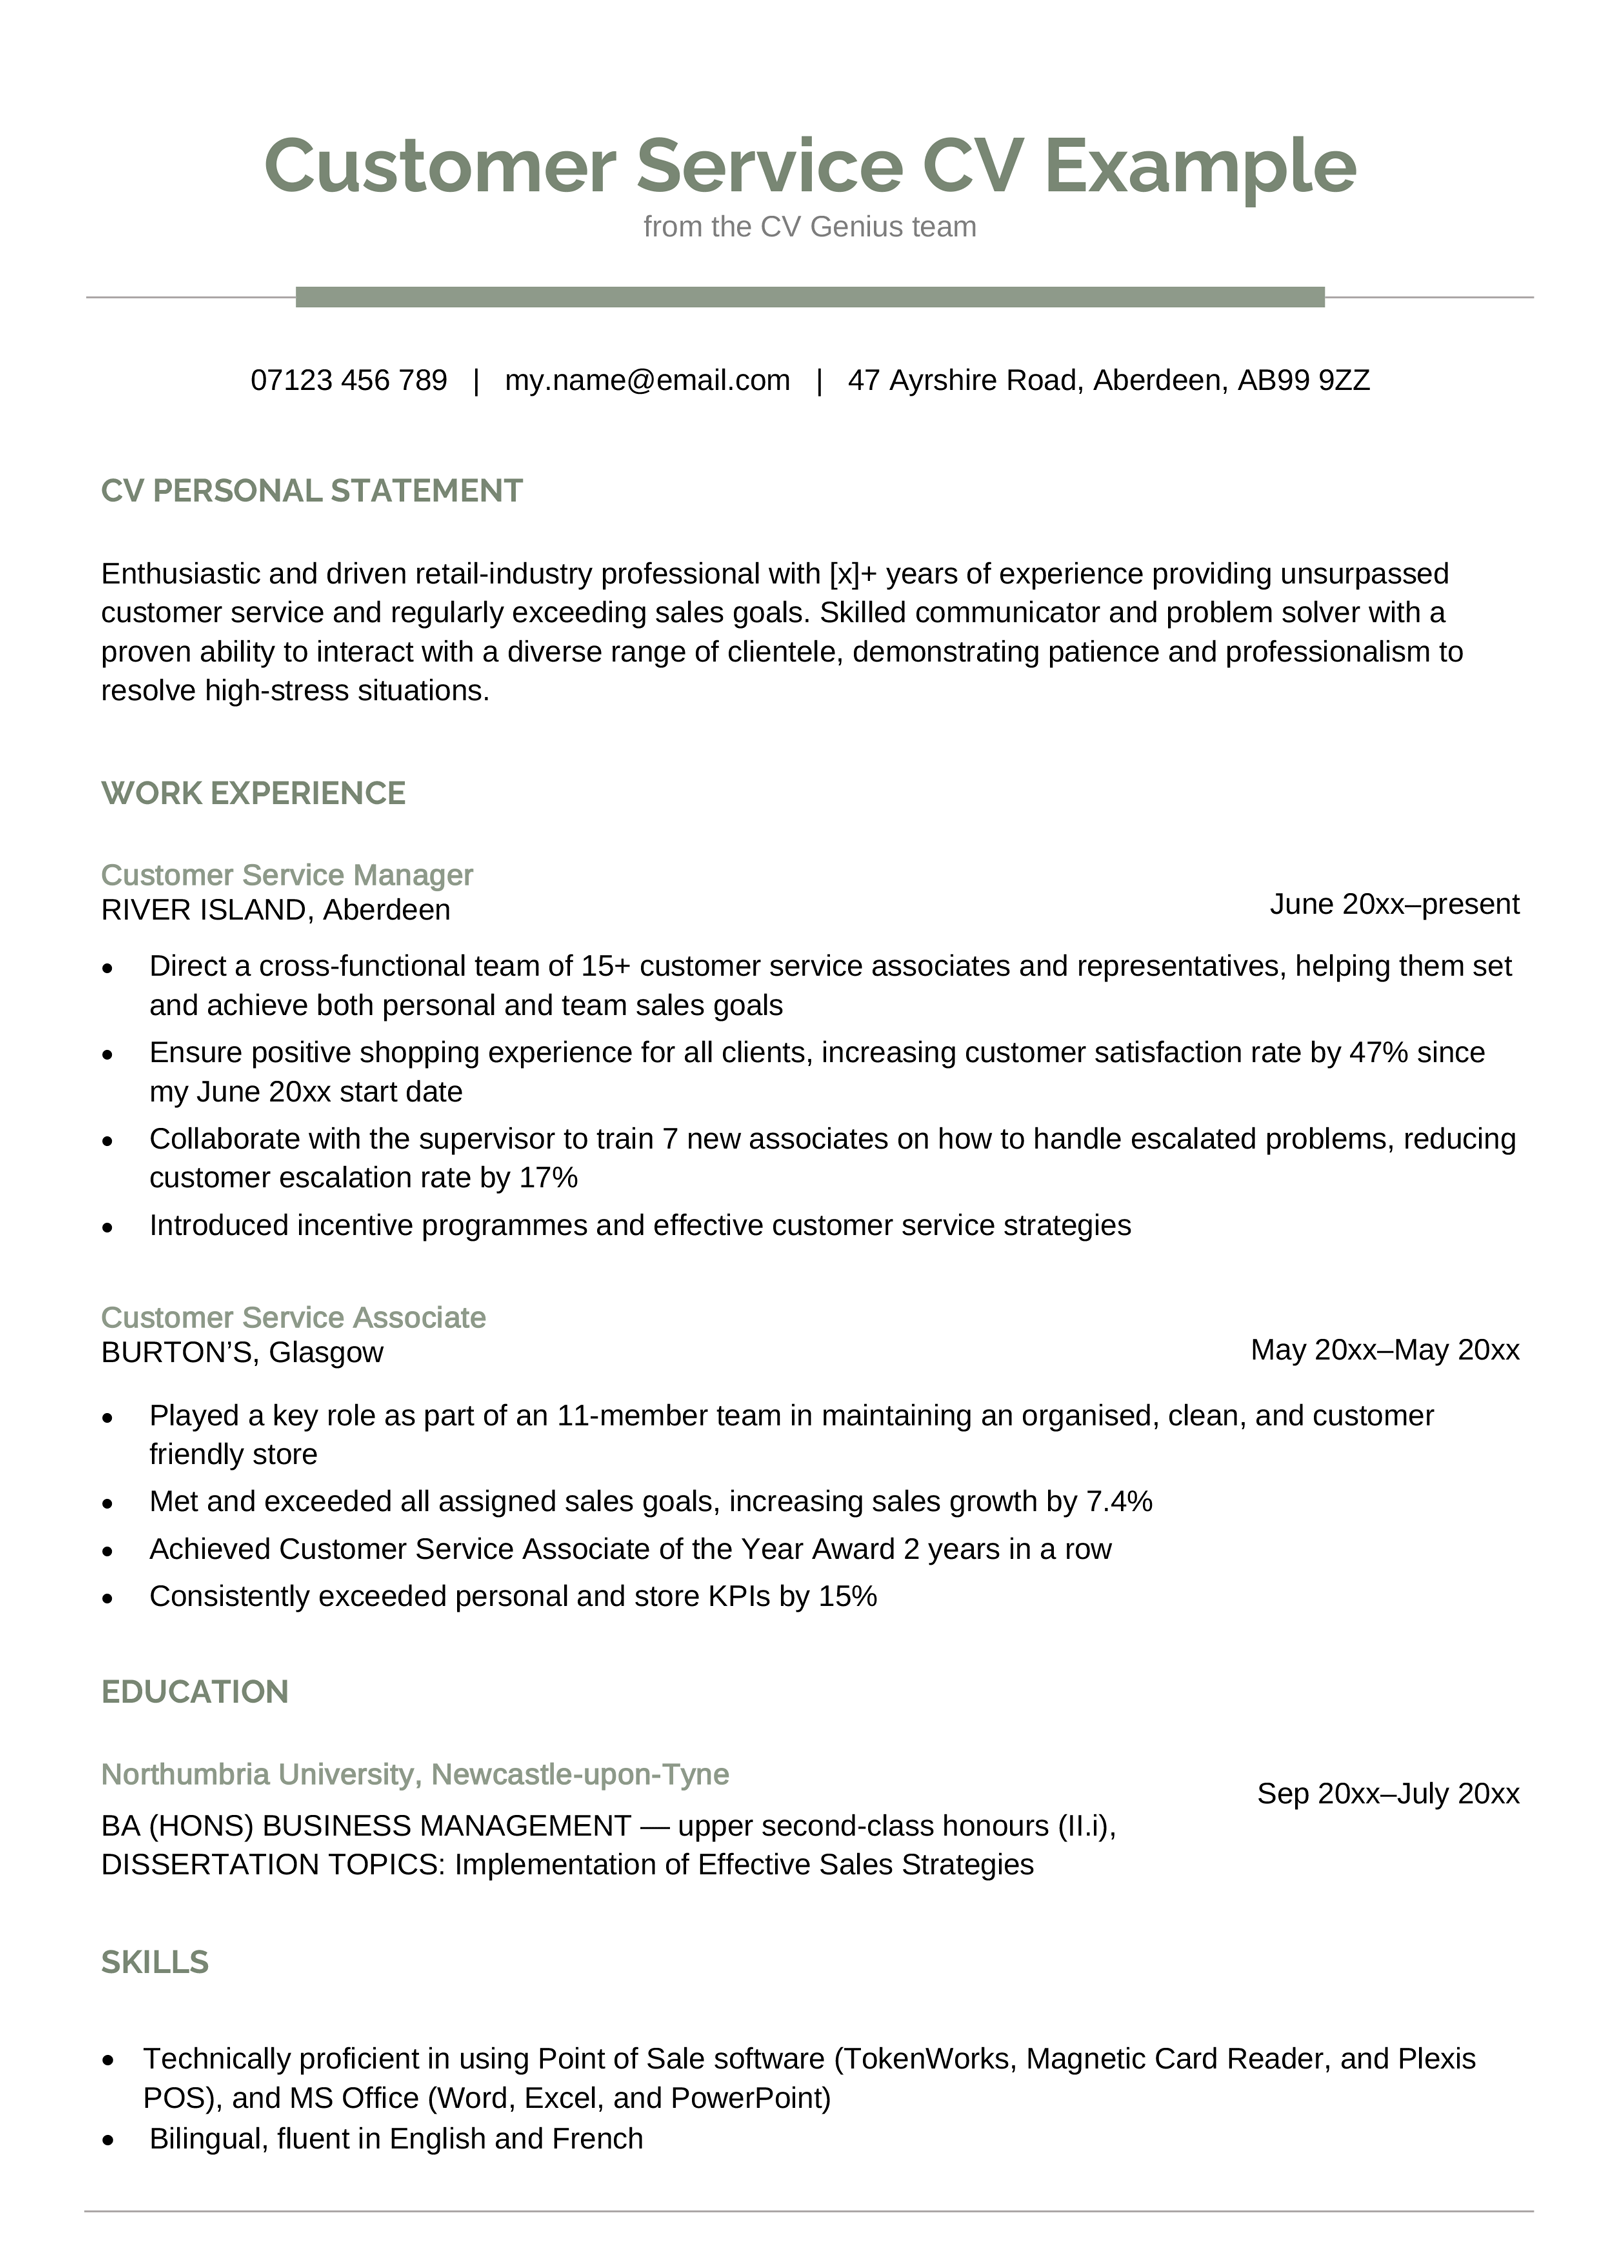 A simple CV template example in light green for a customer service role that applicants can look at to understand how to fill in a professional CV template. 